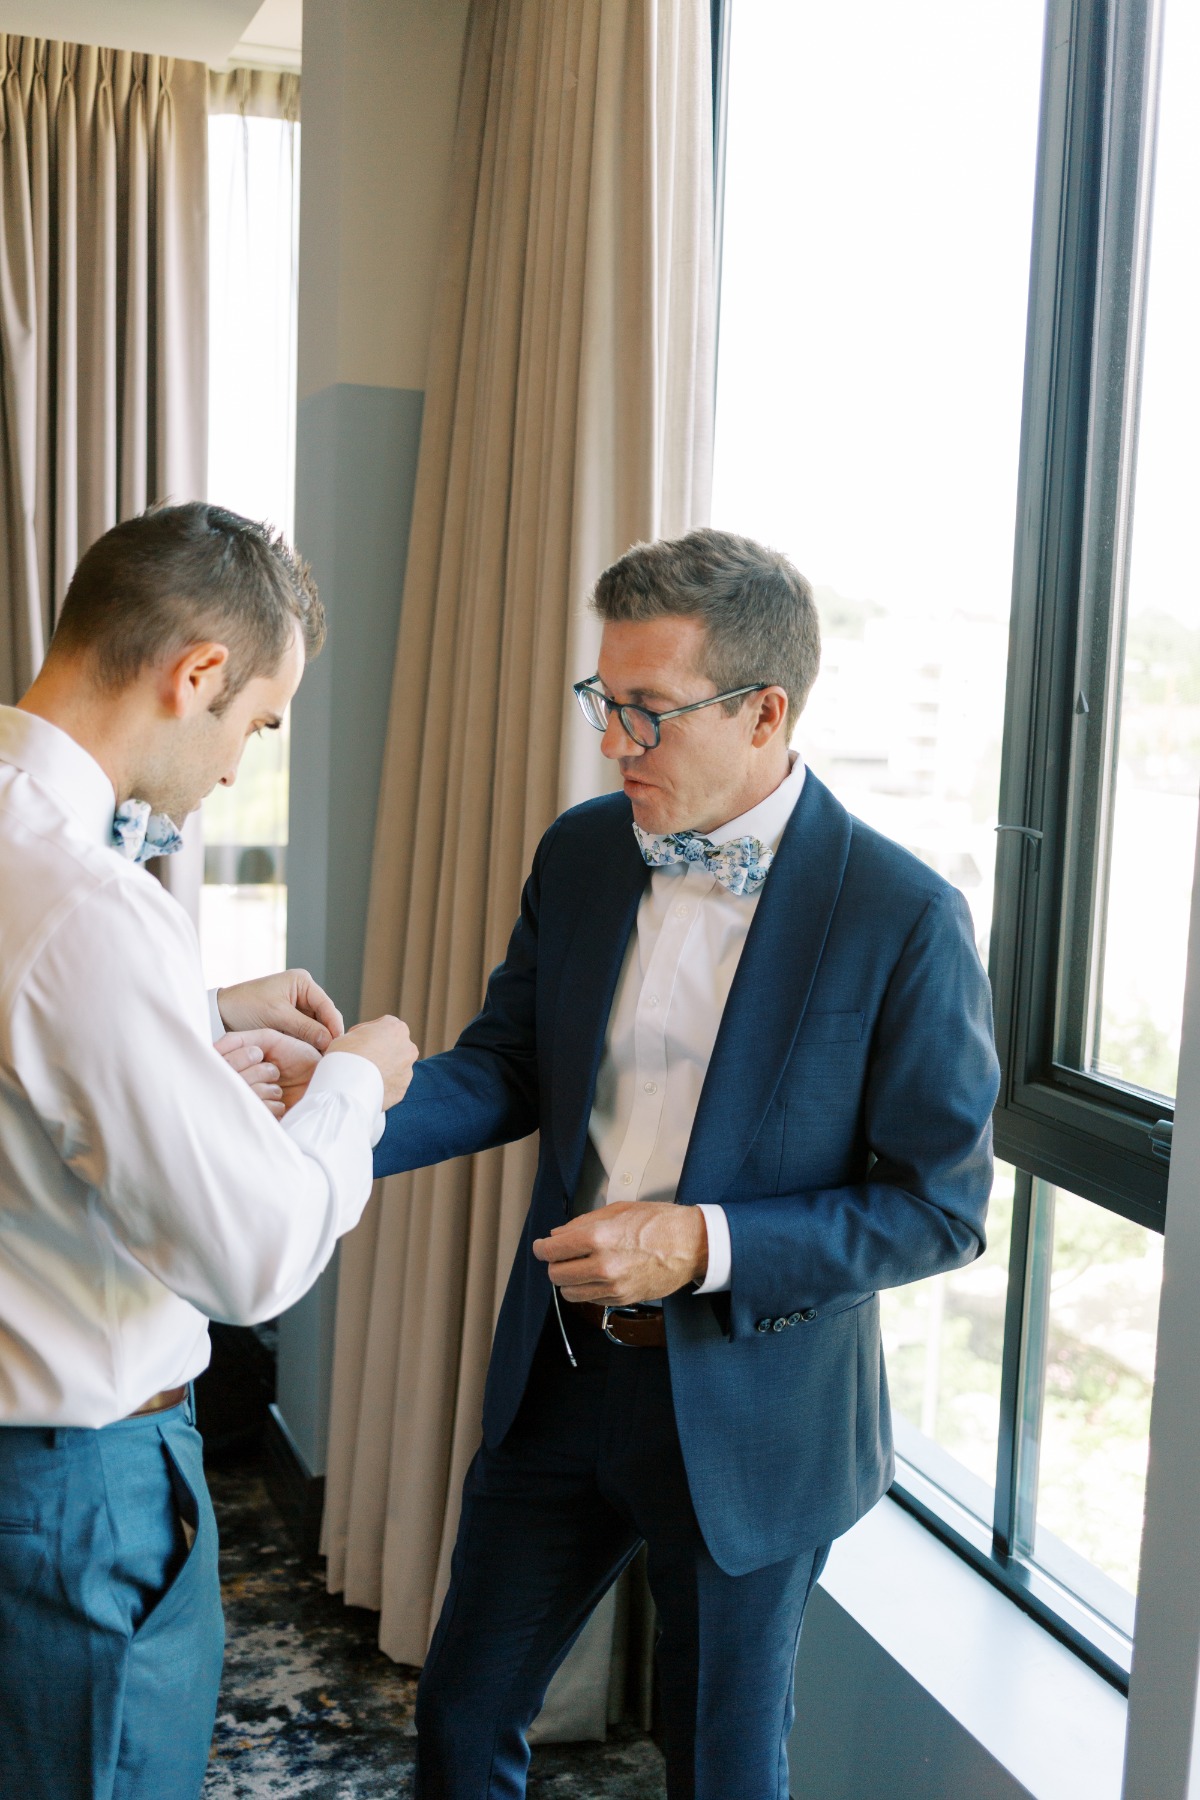 Groom helping other groom put on blue floral bow tie & cufflinks